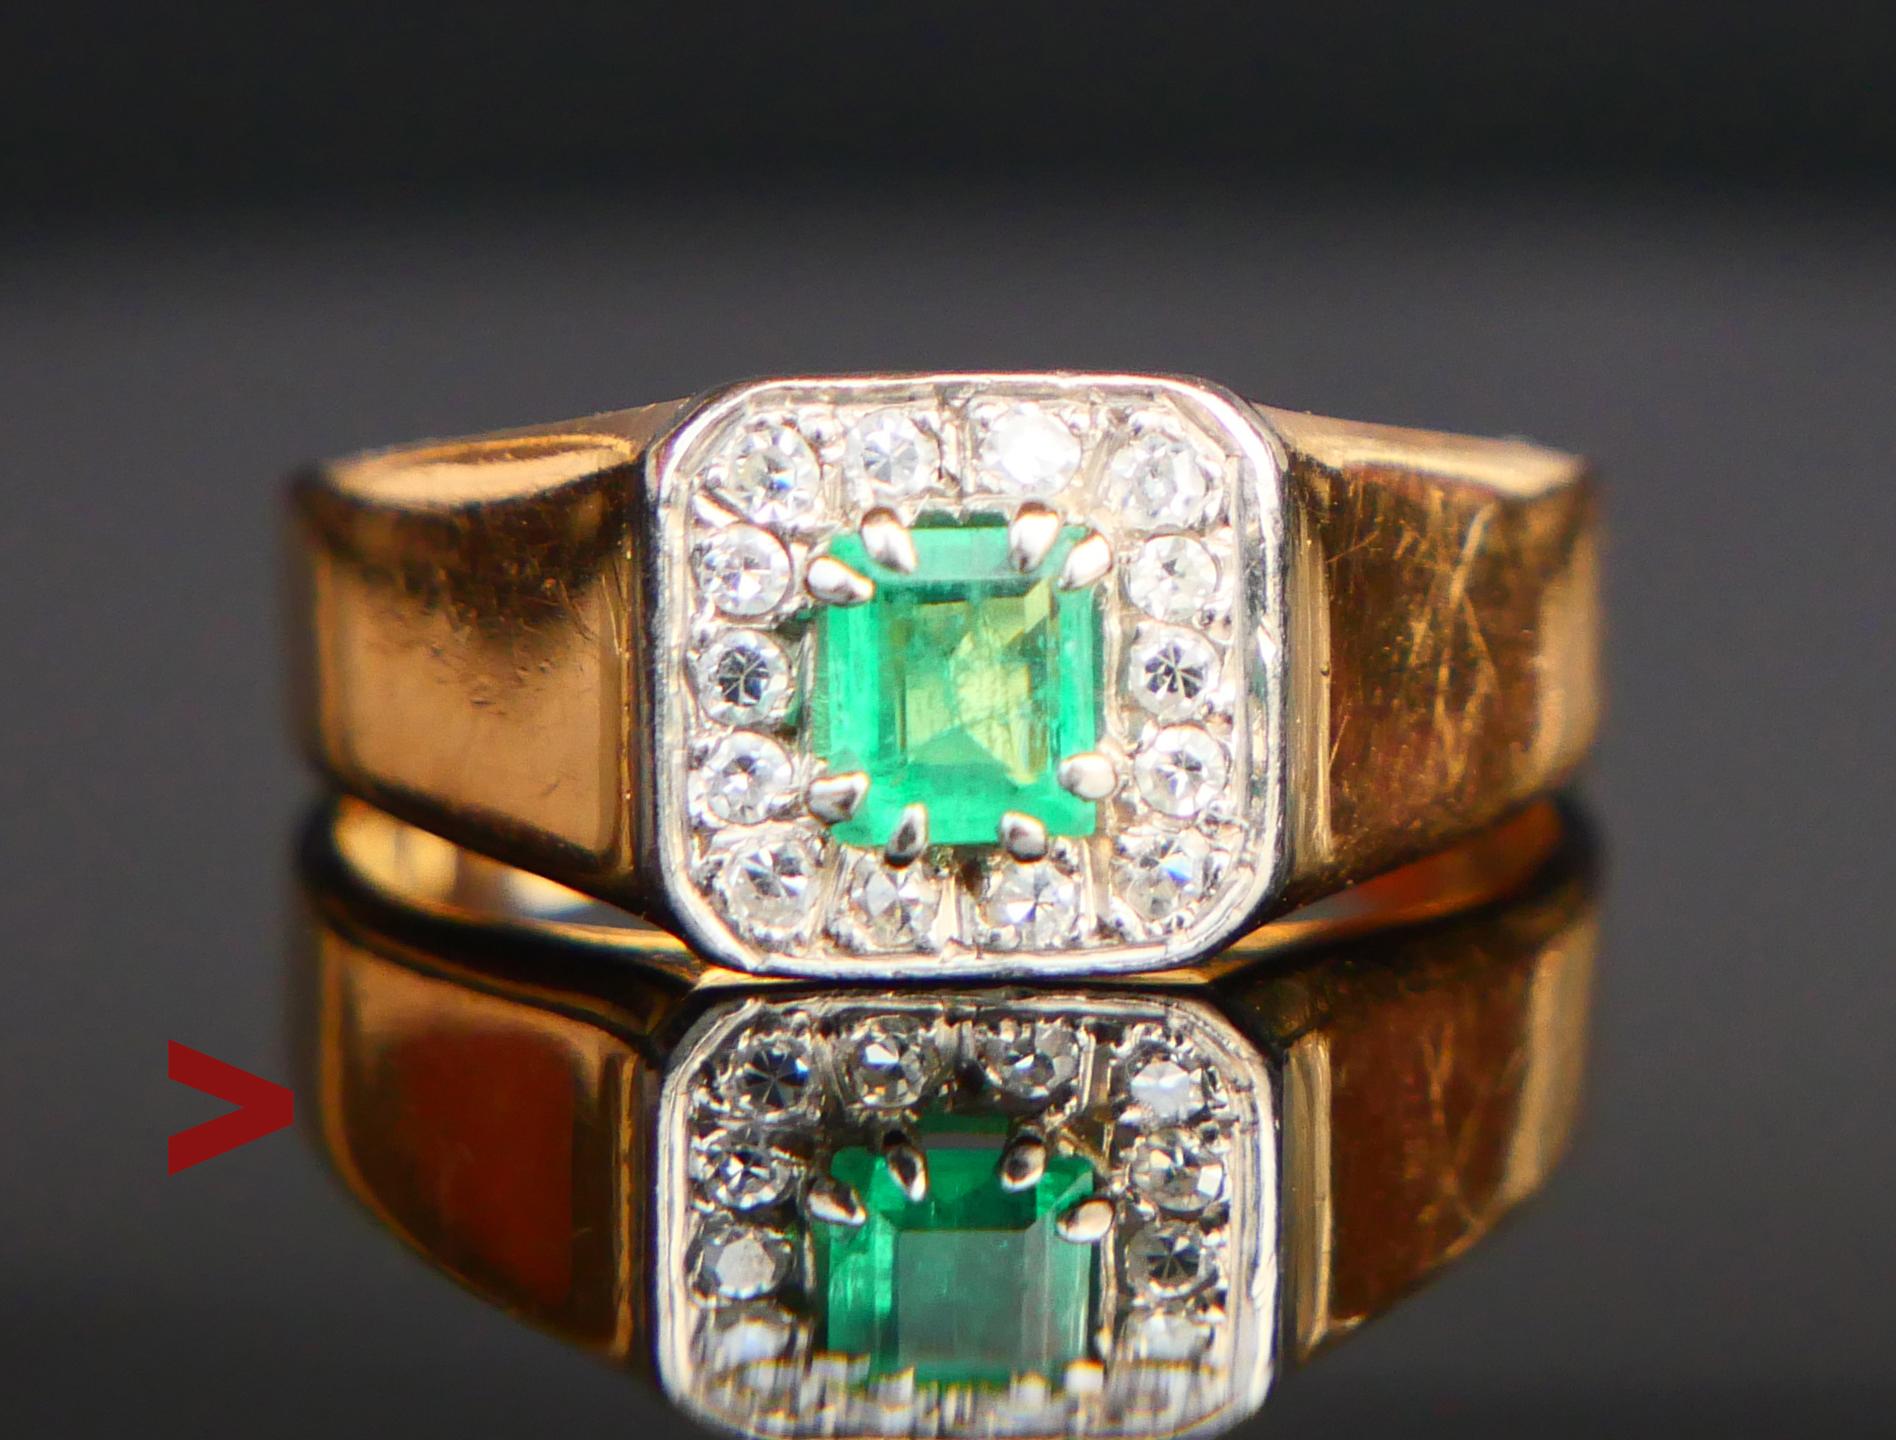 Vintage Emerald and Diamond ring with wider band.

Swedish ring, XX century.Marked 18K.

Maker: JP ( Petterssons Jewelers ), city of Stockholm, existed 1913- 1973.

Marks of the year fragmented: likely Q9 / made in 1966

Crown : 8 mm x 8mm x 5mm